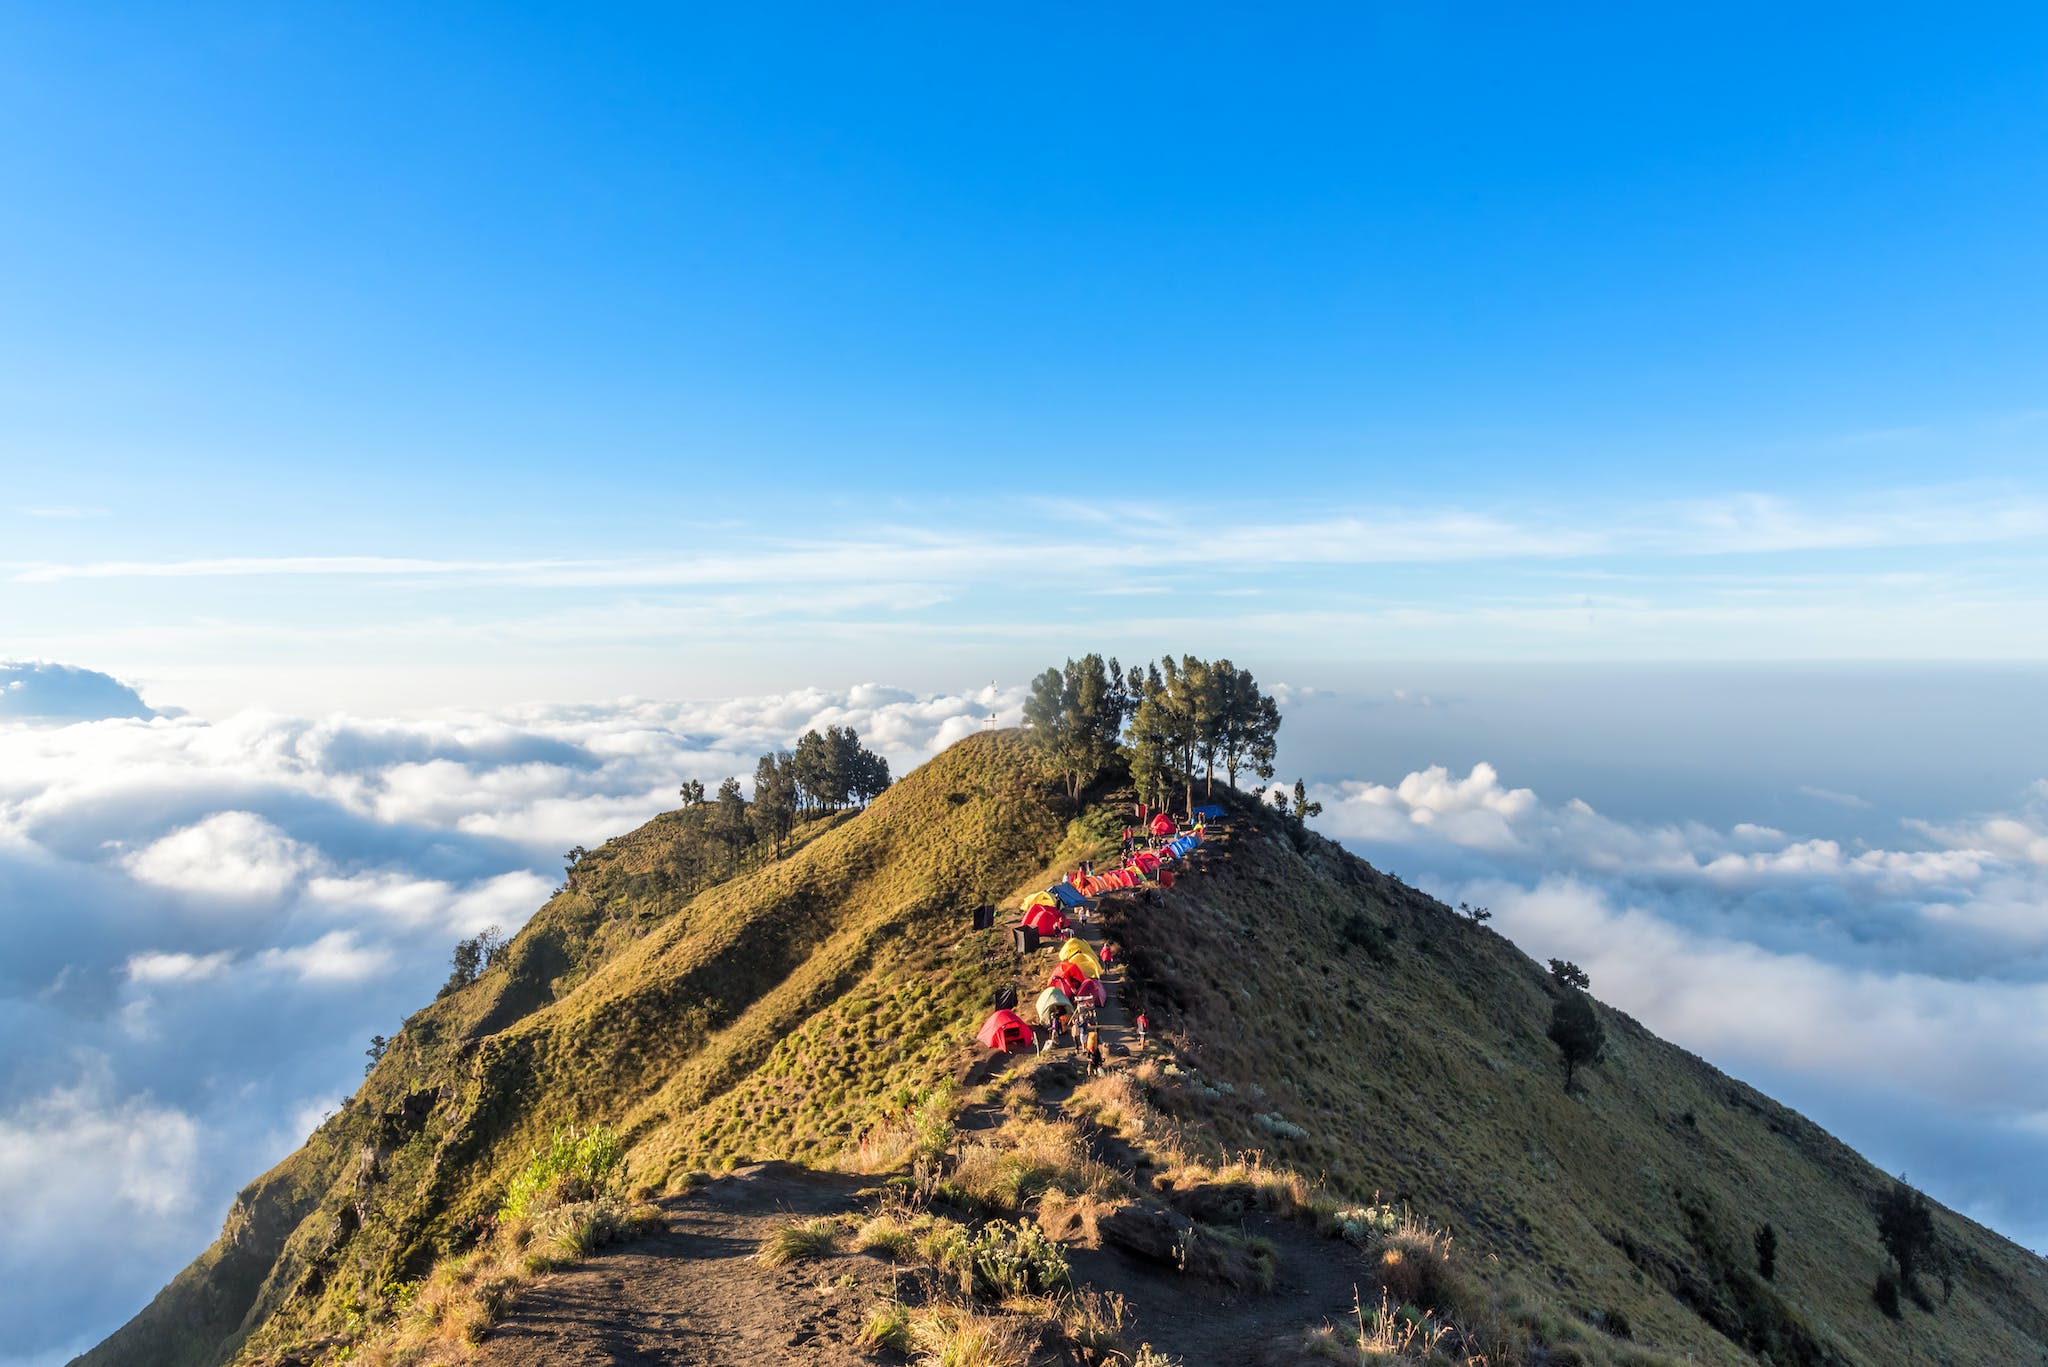 A campsite along the Sembalun Crater rim along the route up Mount Rinjani, the second highest volcano in Indonesia.